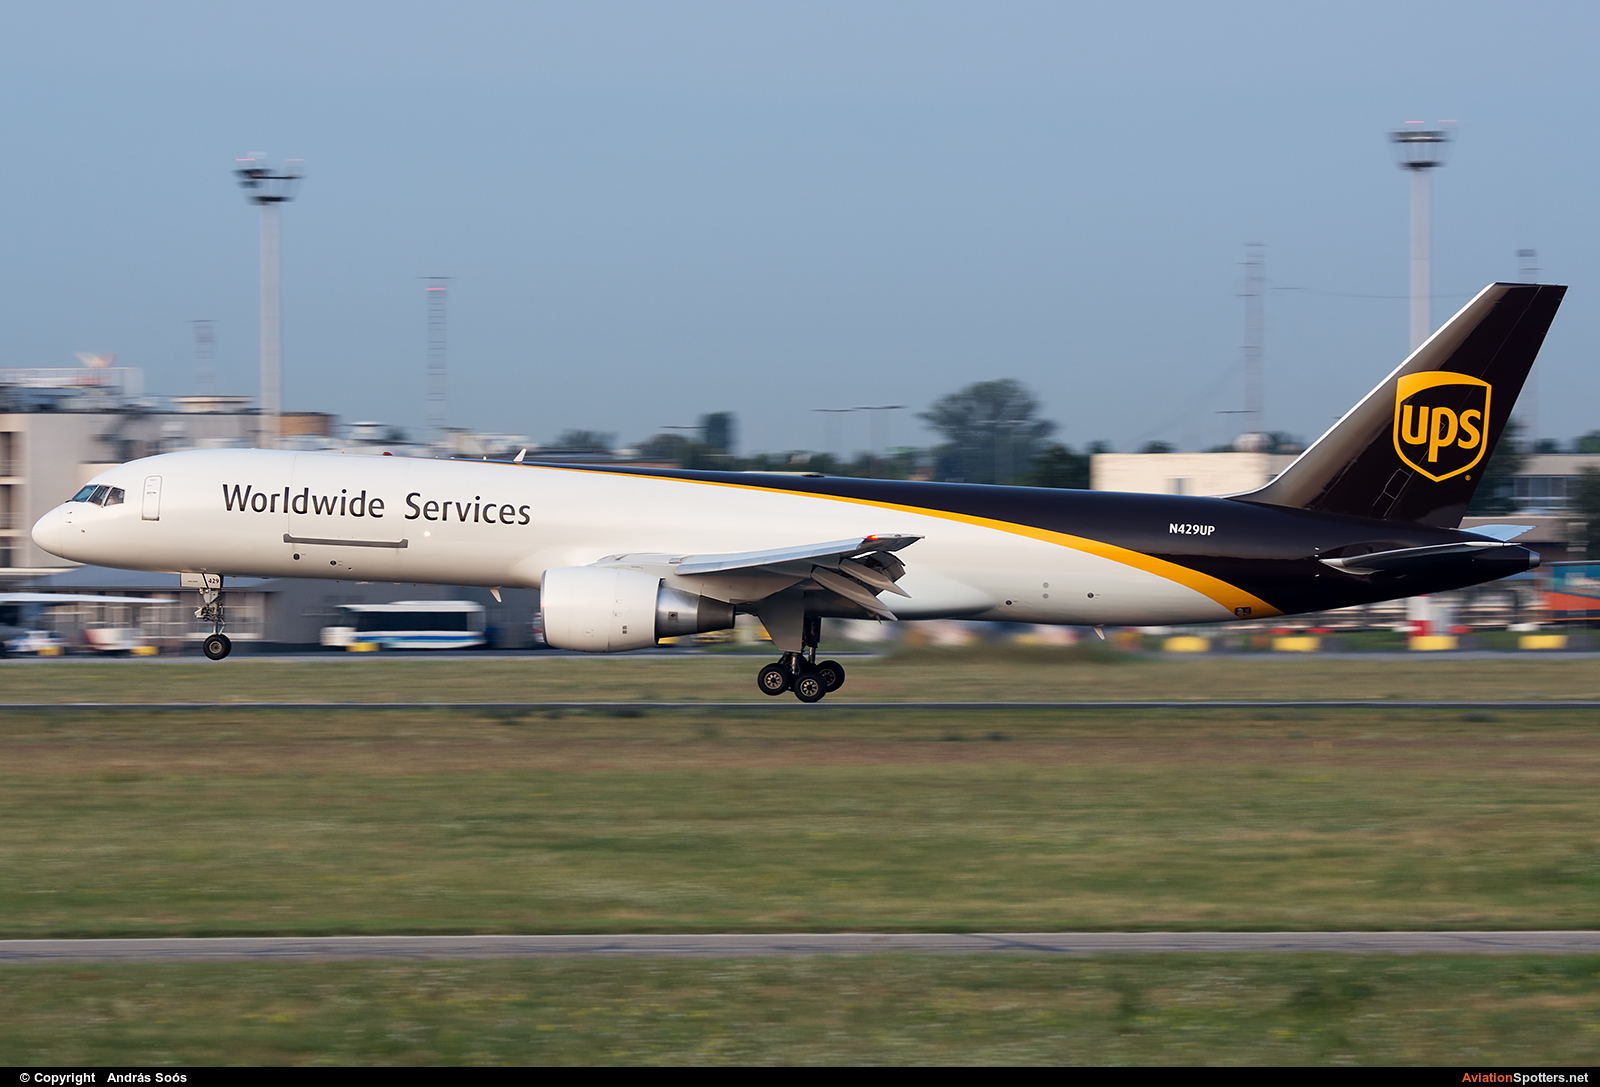 UPS - United Parcel Service  -  757-200F  (N429UP) By András Soós (sas1965)